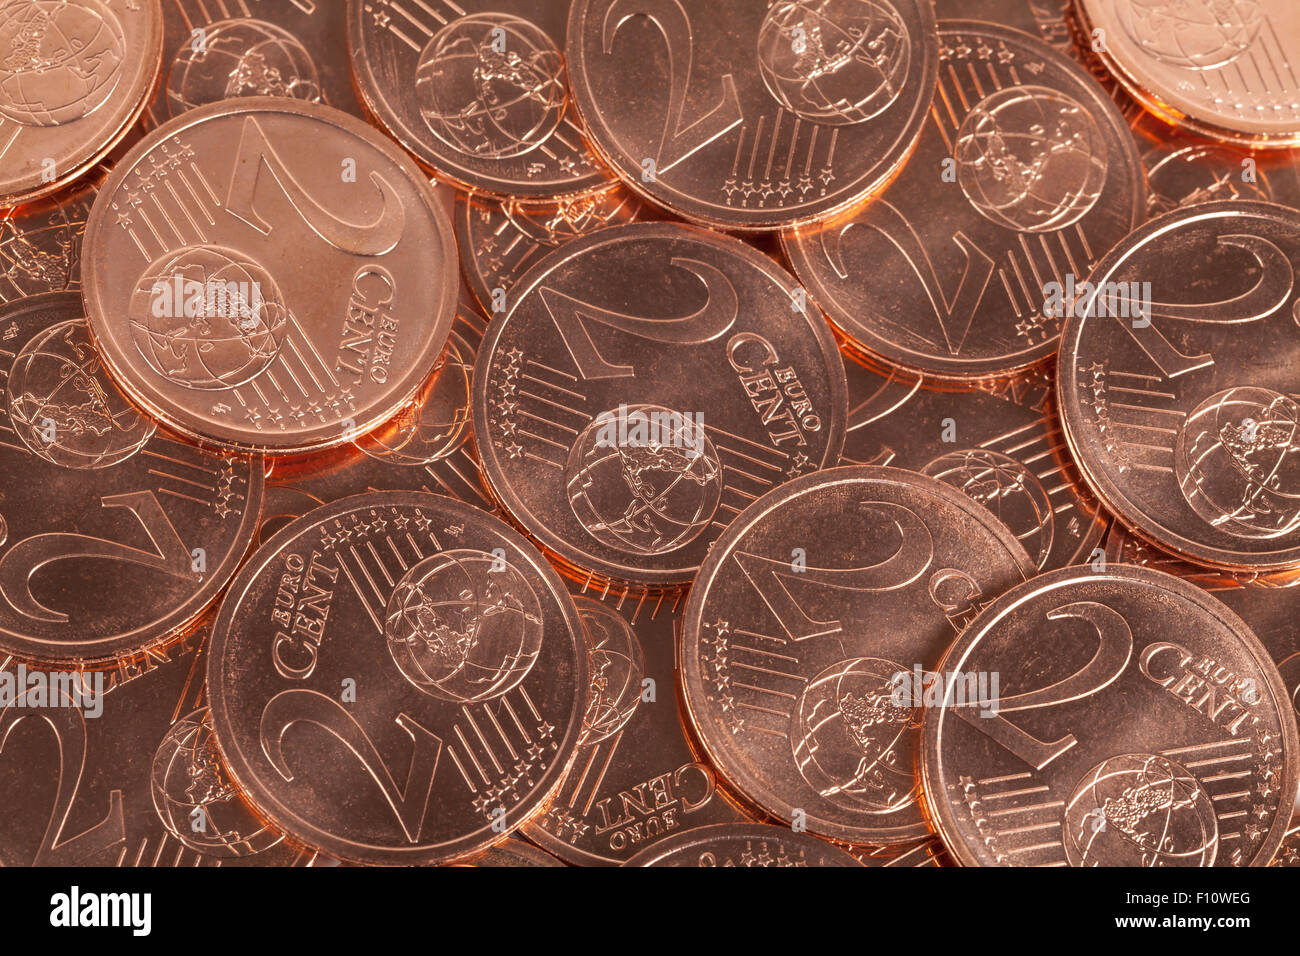 Two Euro cent coins Stock Photo